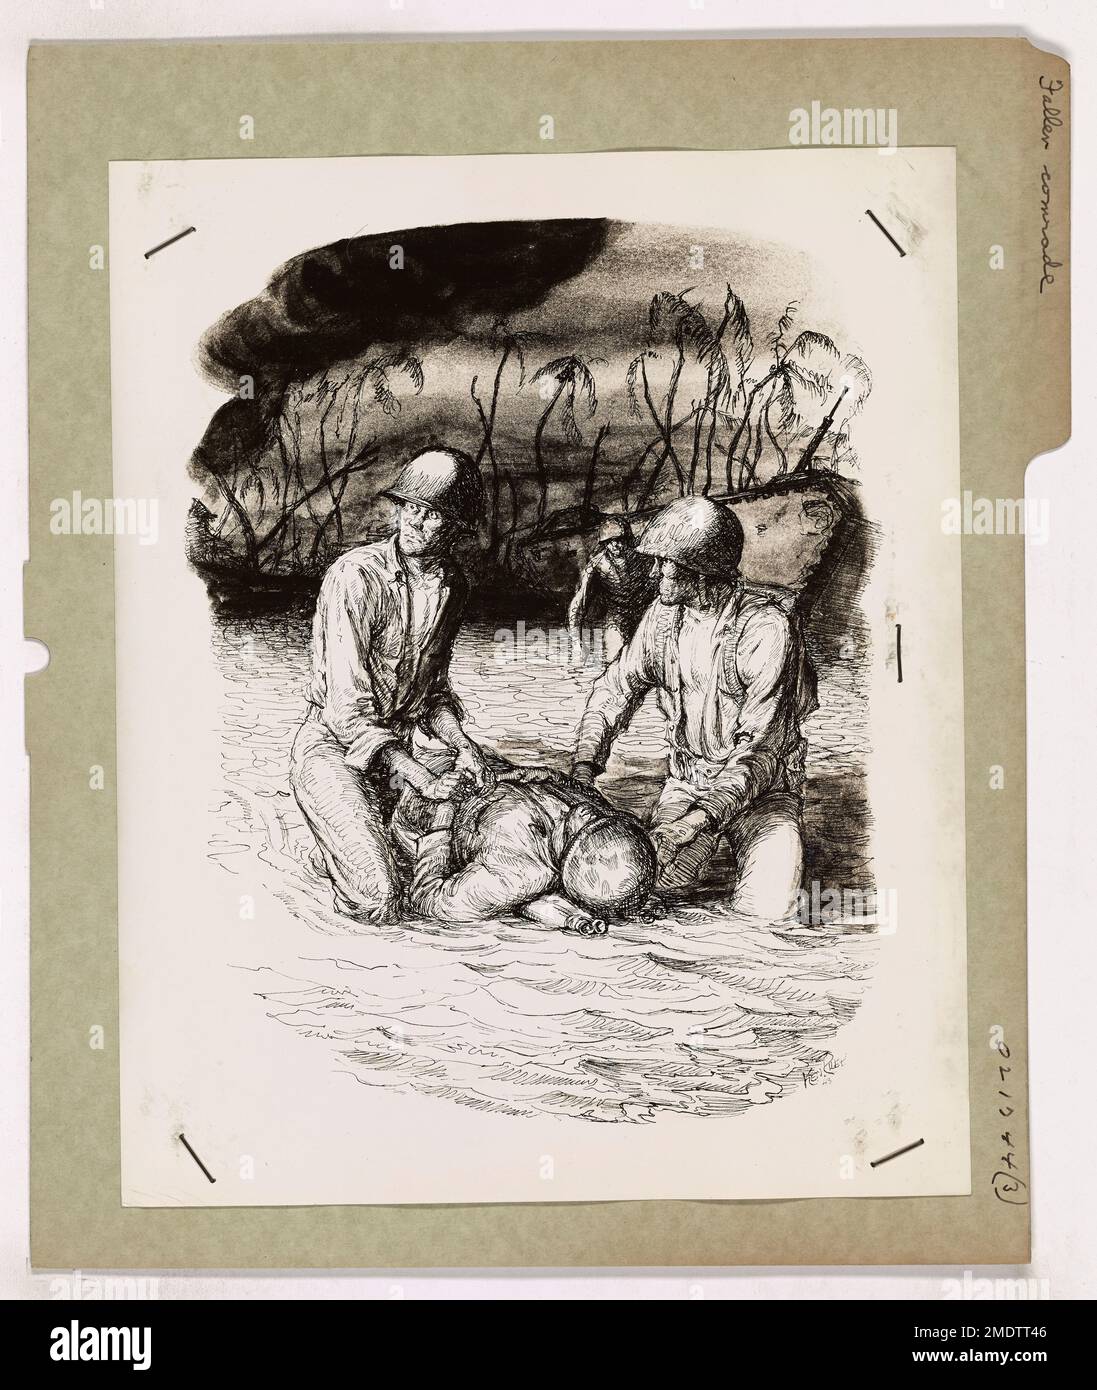 Fallen Comrade. This image depicts two Coast Guardsmen carrying the body of a fallen comrade, drawn by Coast Guard Combat Artist Ken Riley. Stock Photo